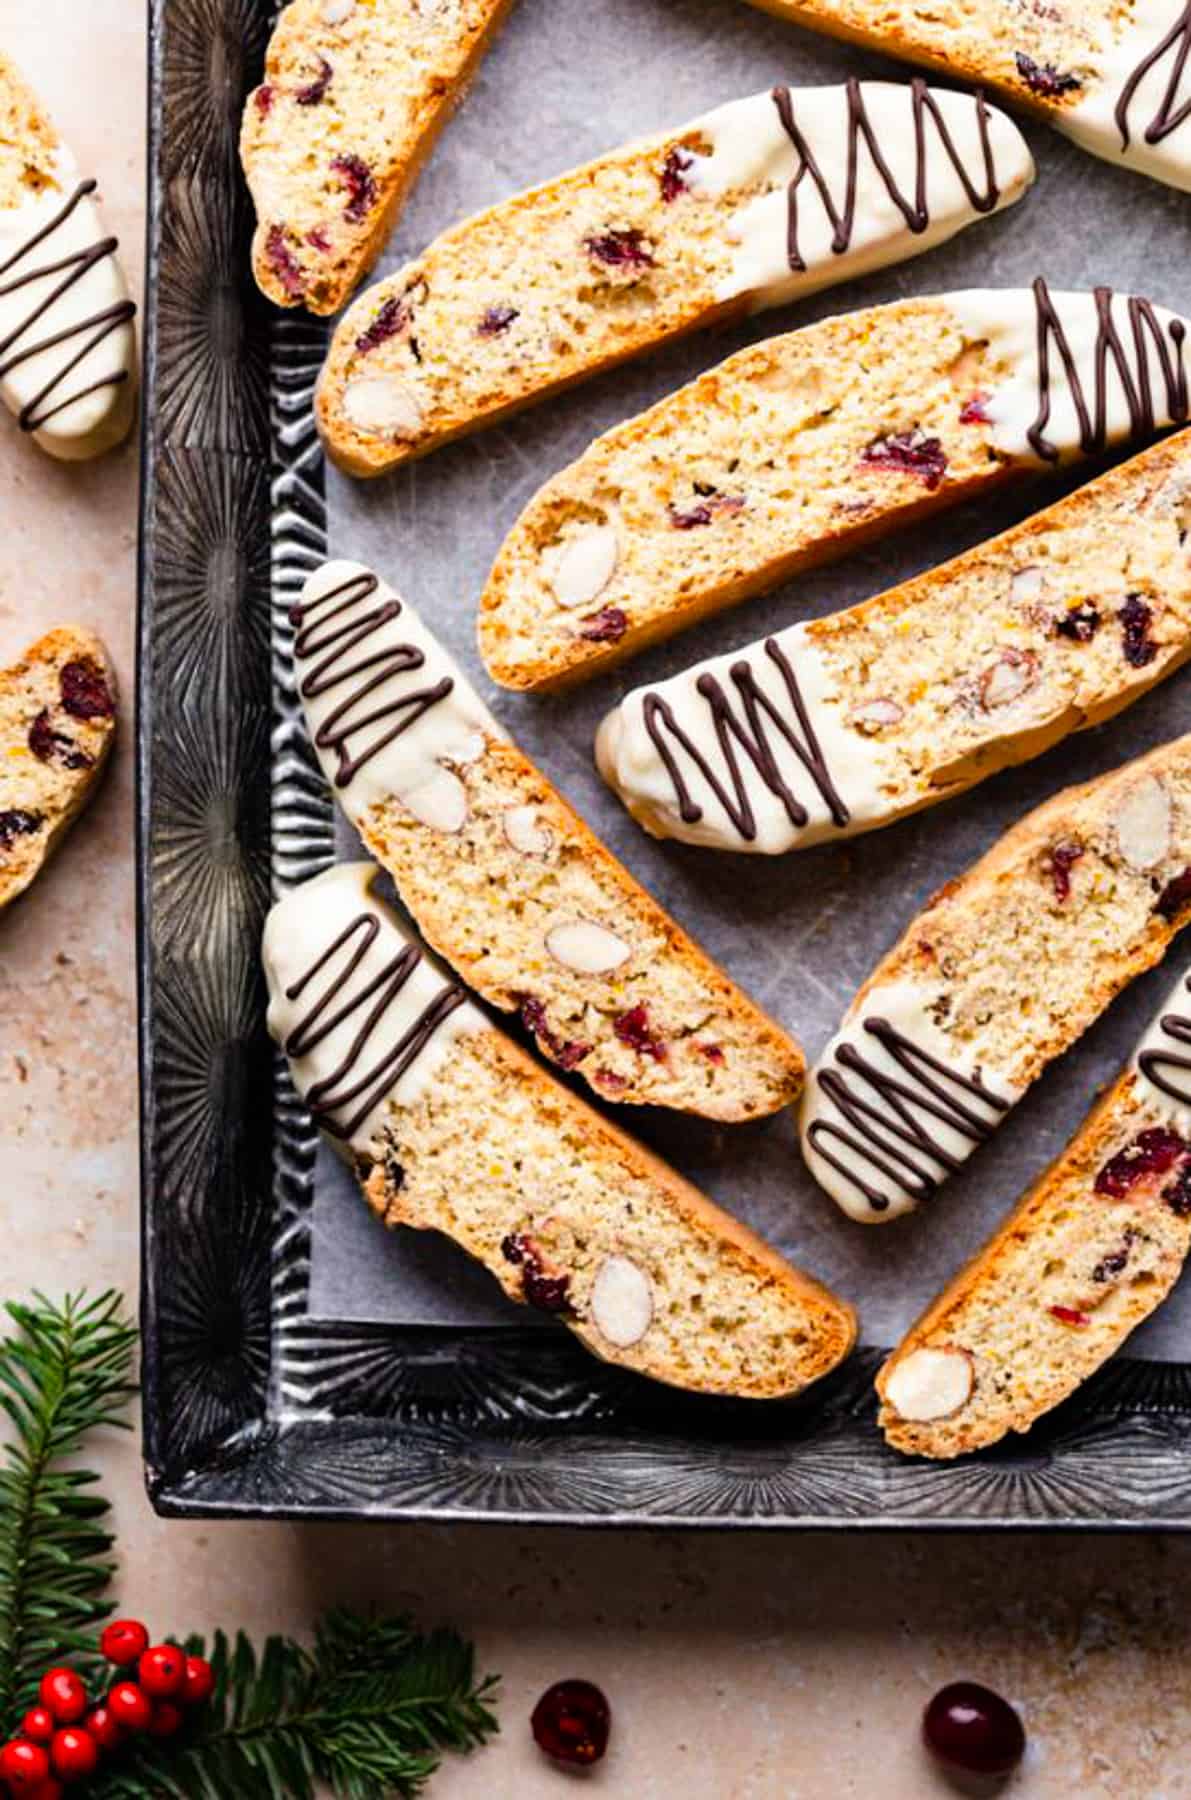 cranberry almond biscotti dipped in white chocolate and drizzled with more chocolate inside of the baking tin.